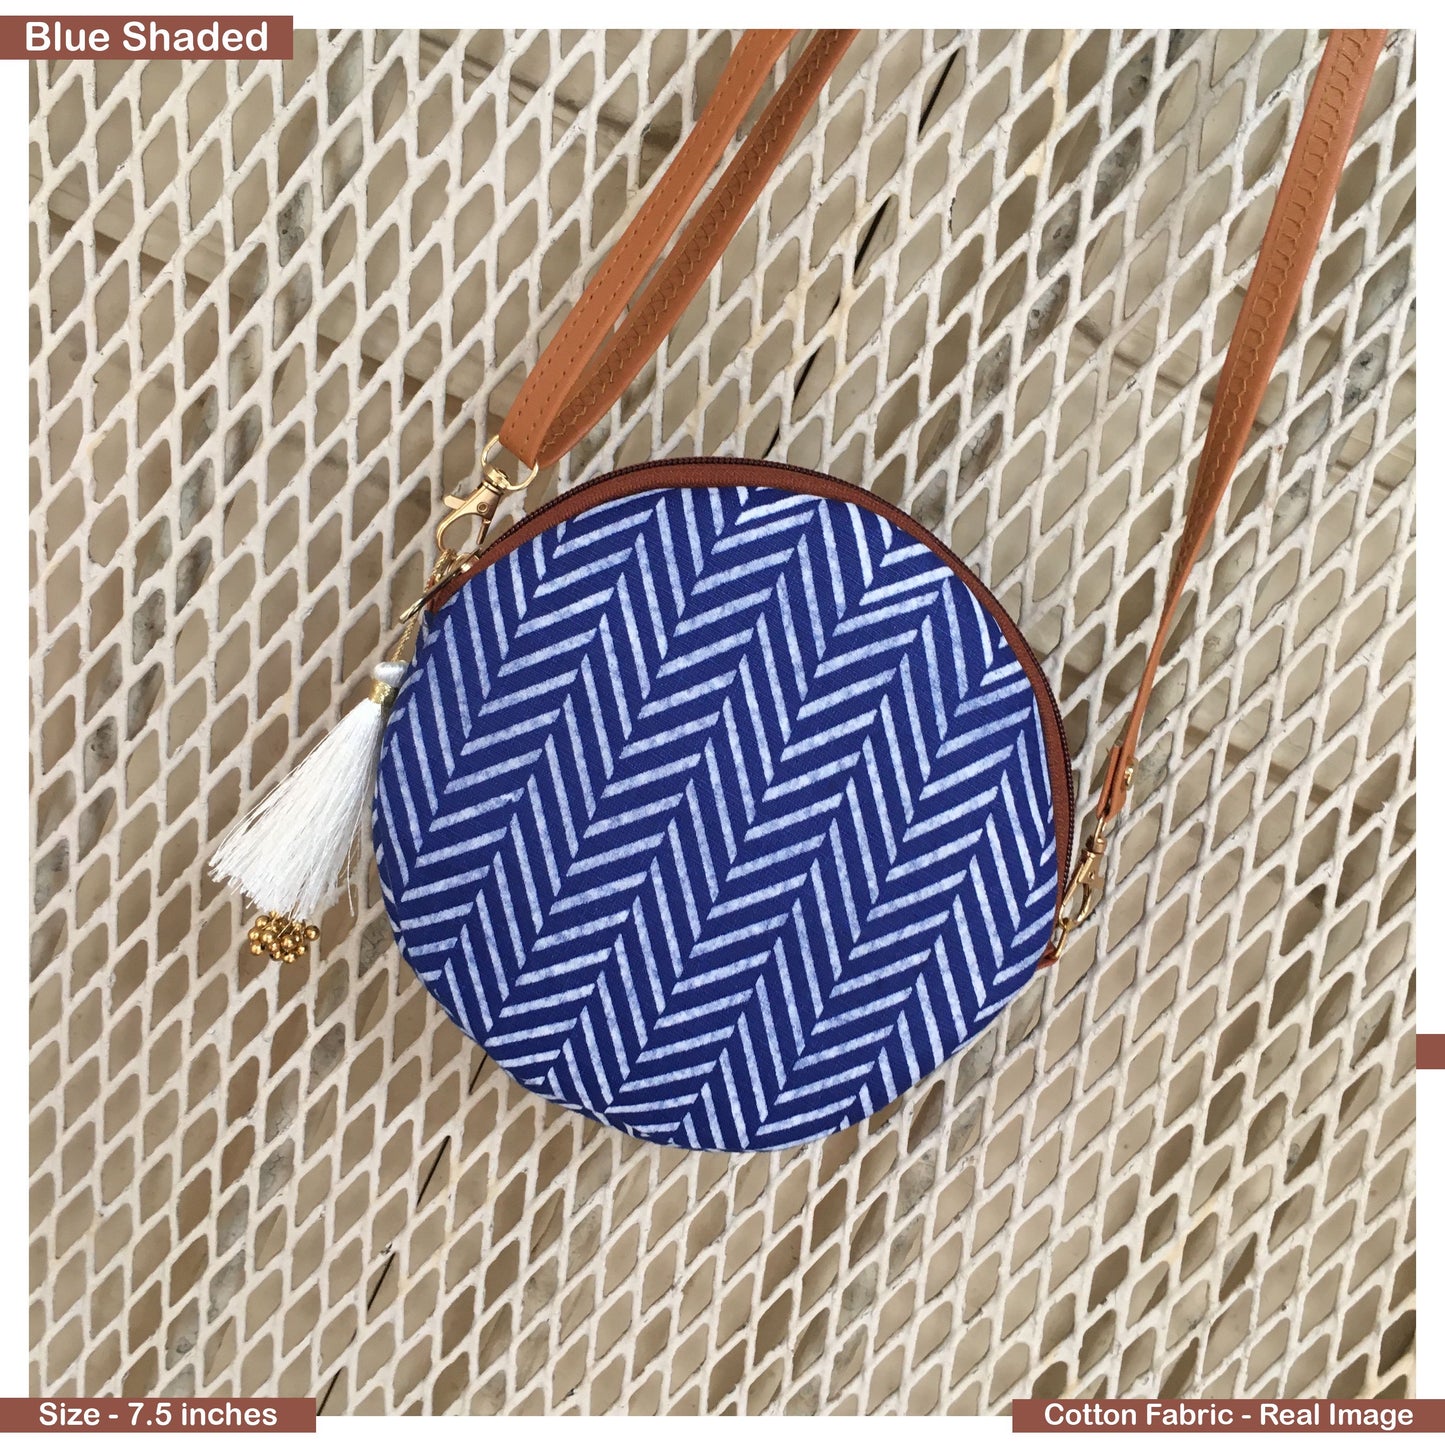 Blue Criss Cross Prints -  Cute Round Sling - Small size